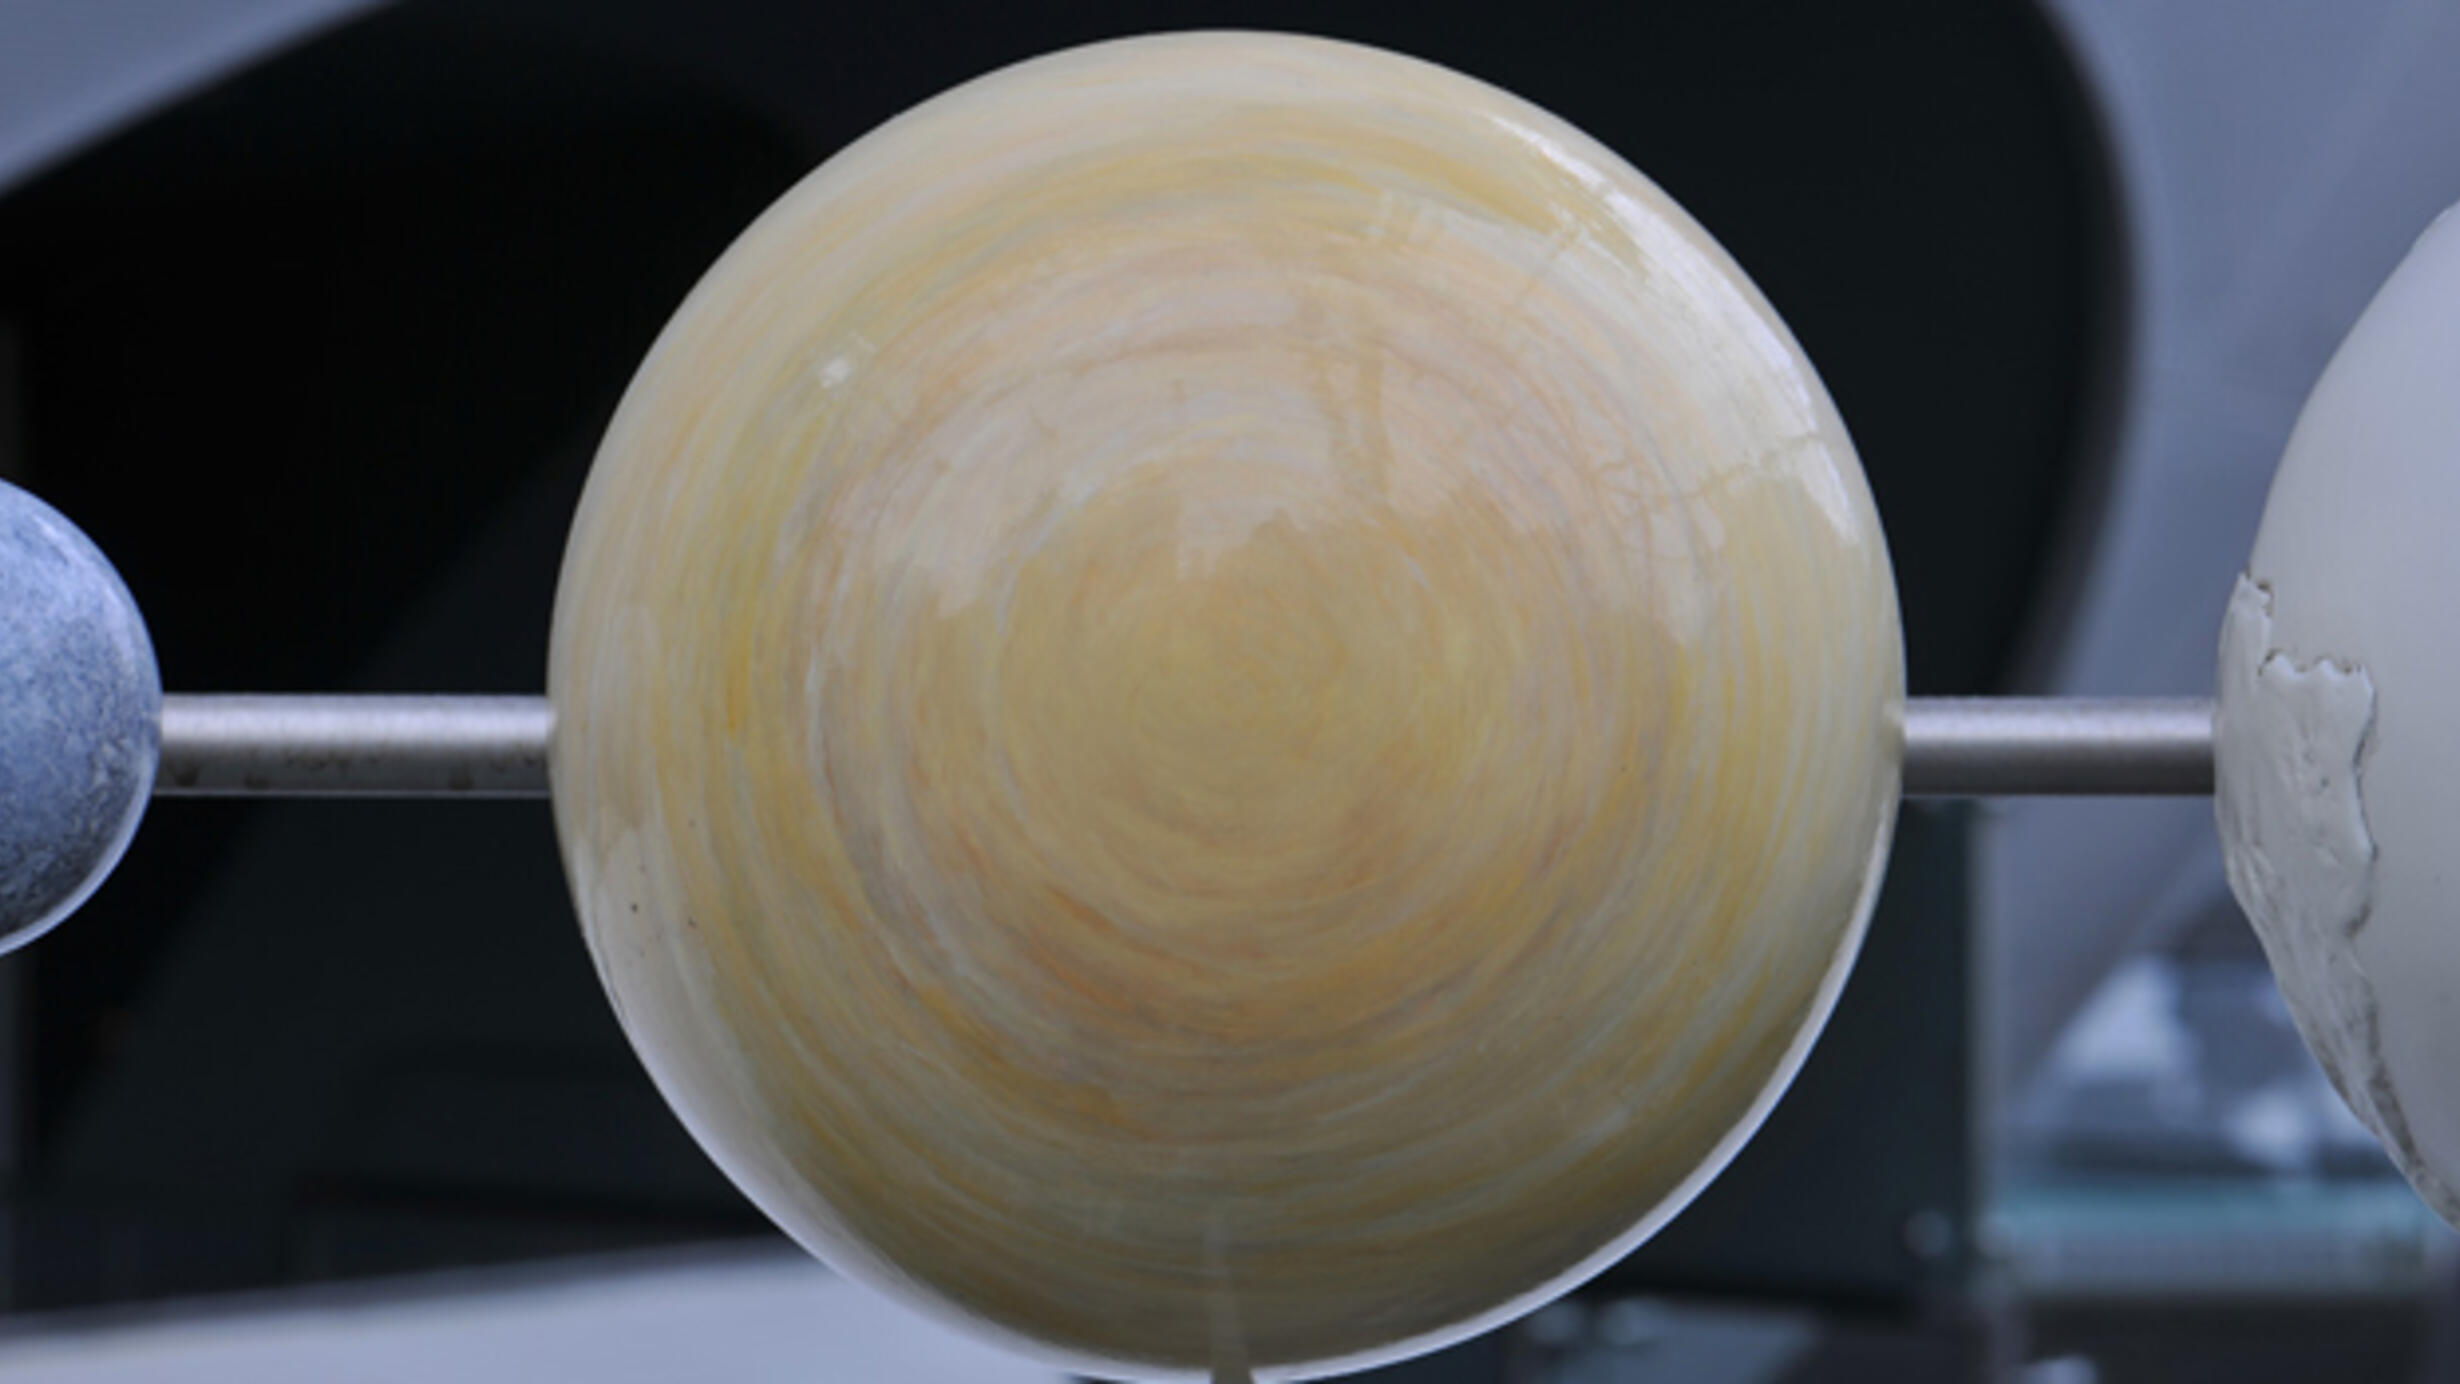 A close-up of a model of the planet Venus.